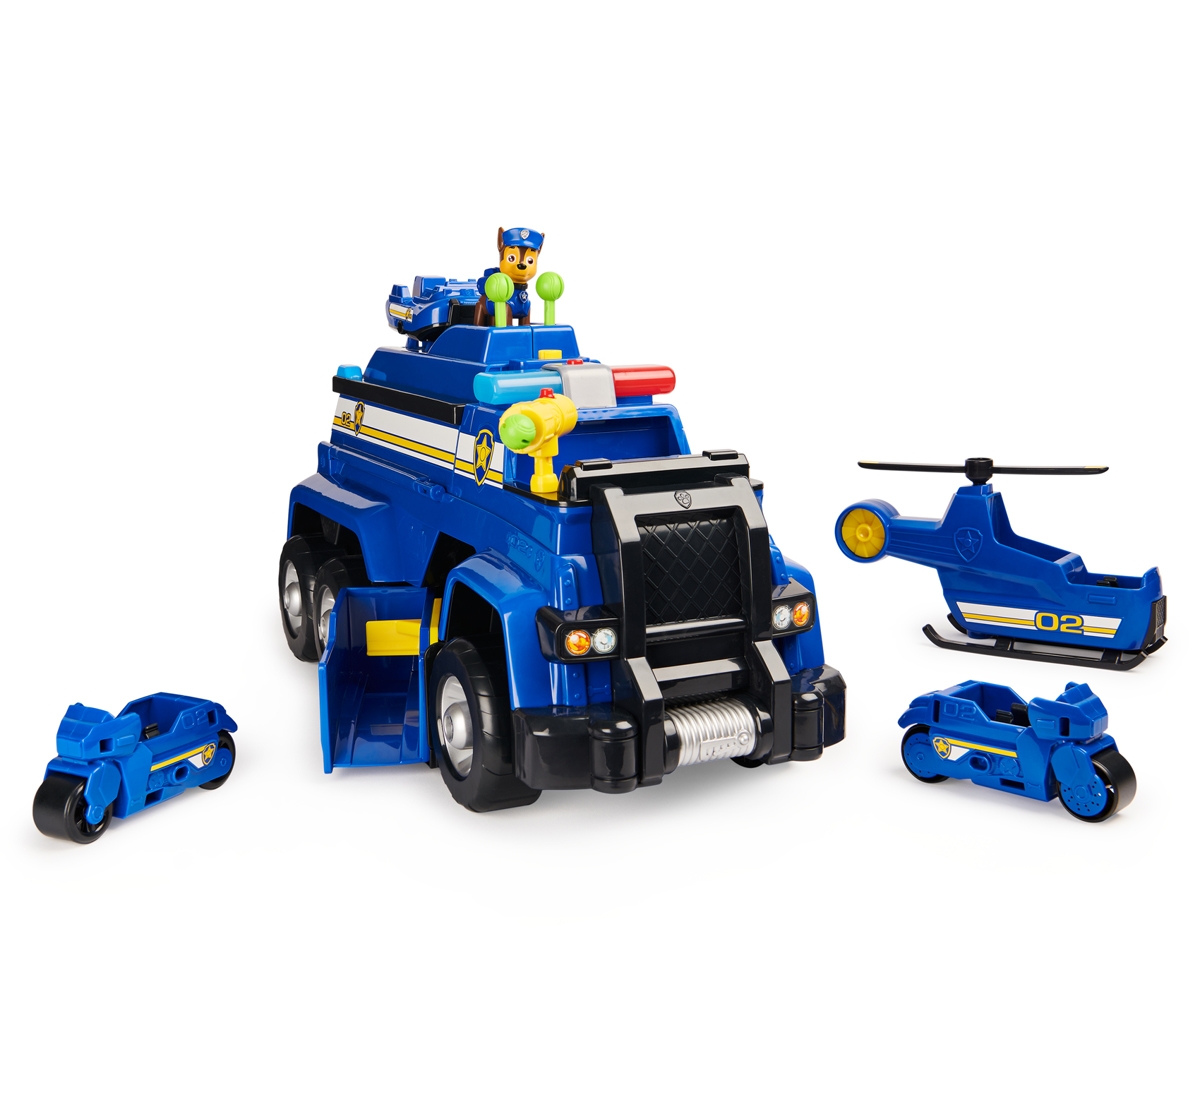 Paw Patrol | Paw Patrol Chase Dluxe Cruser Roleplay Set for Kids 3Y+, Blue 3